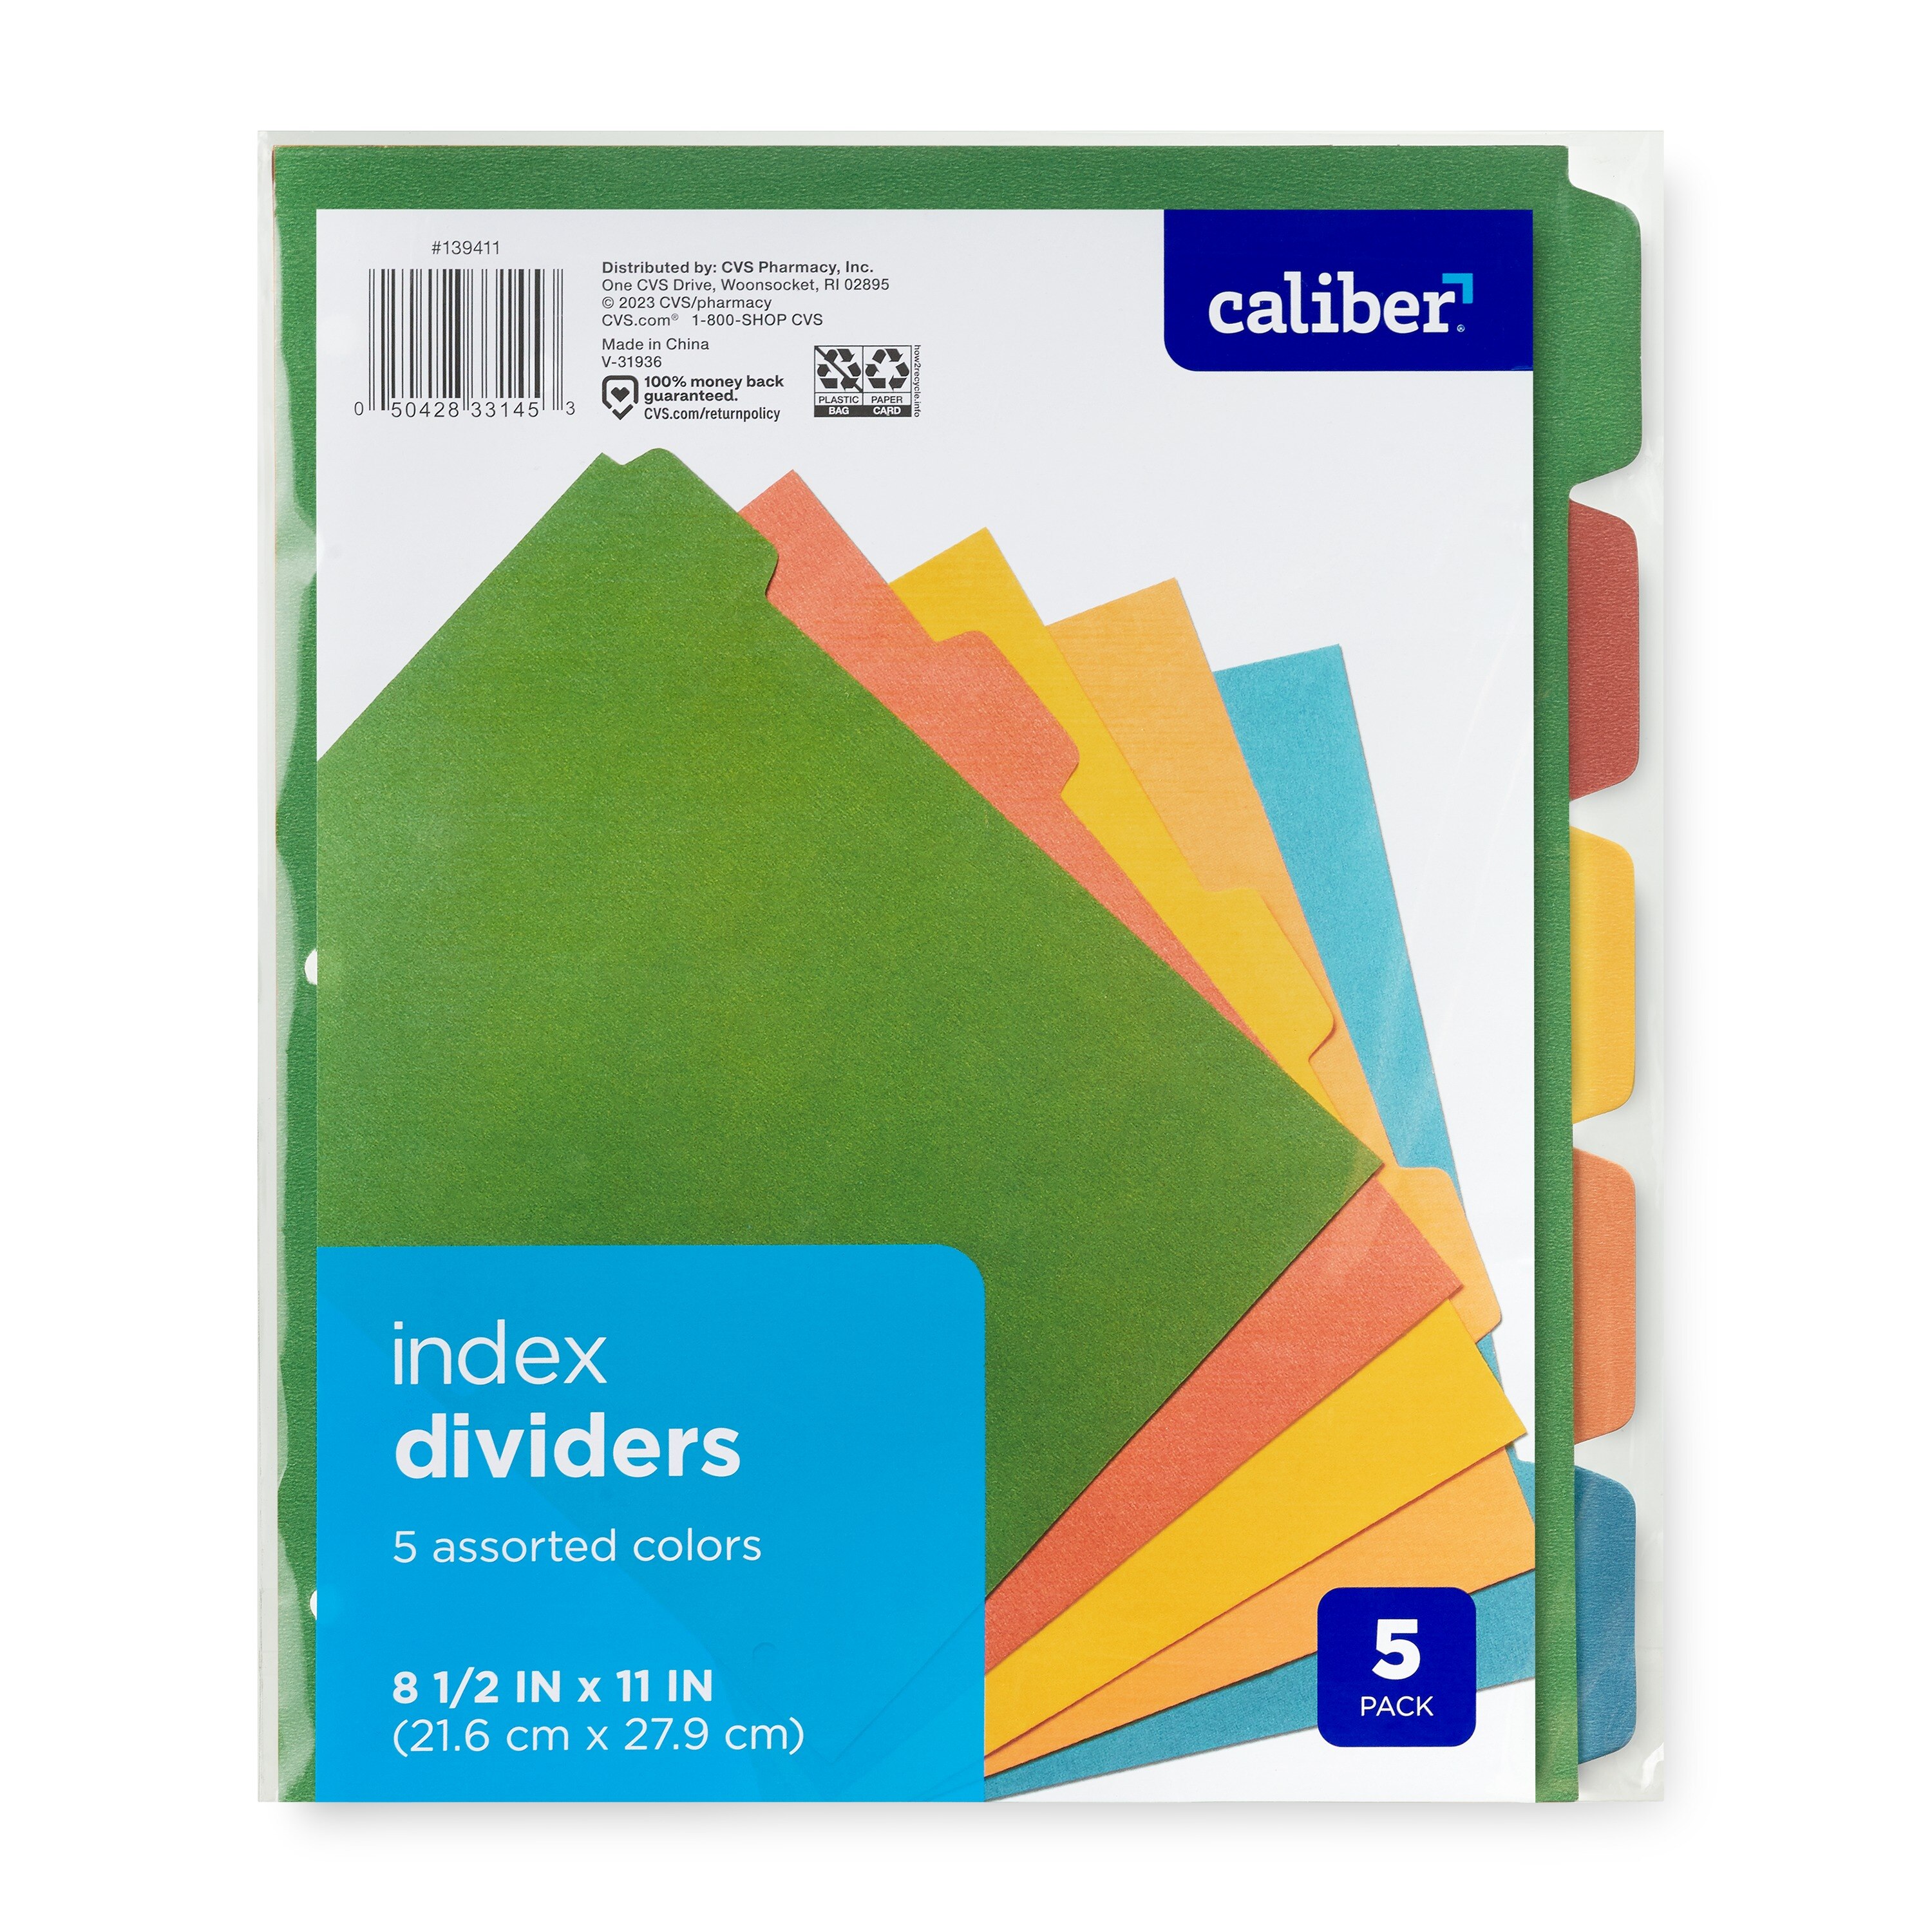 Caliber Index Dividers, Assorted Colors, 5 CT